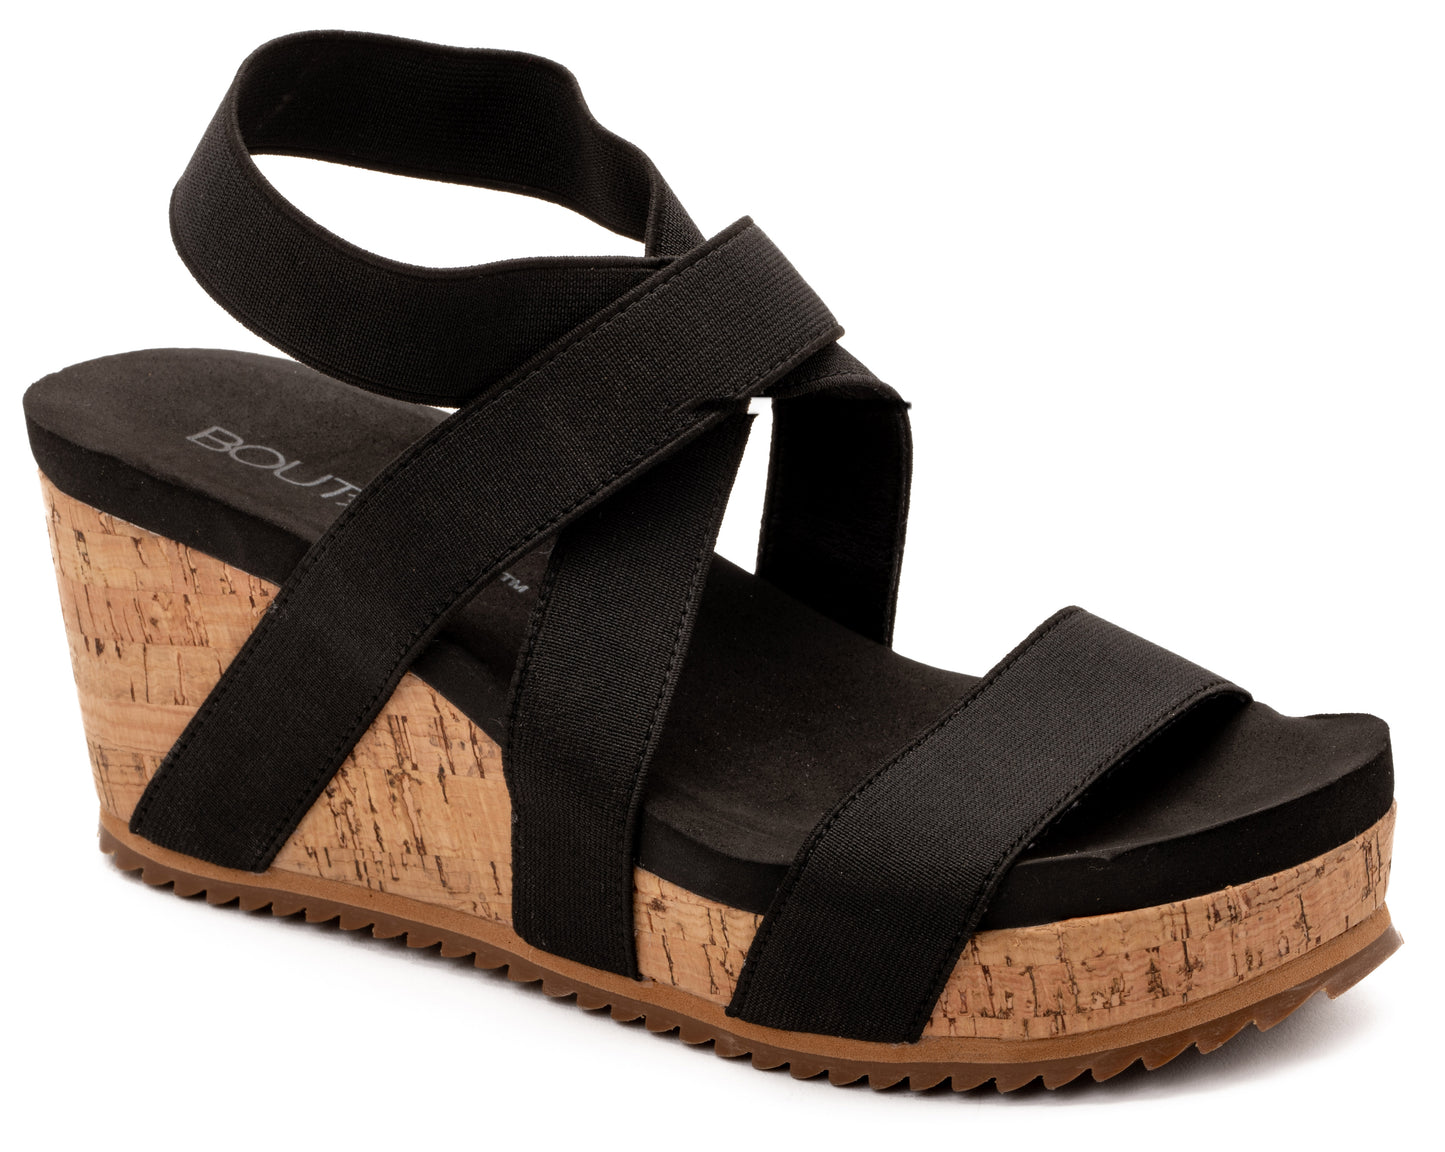 Quirky Wedge Sandals